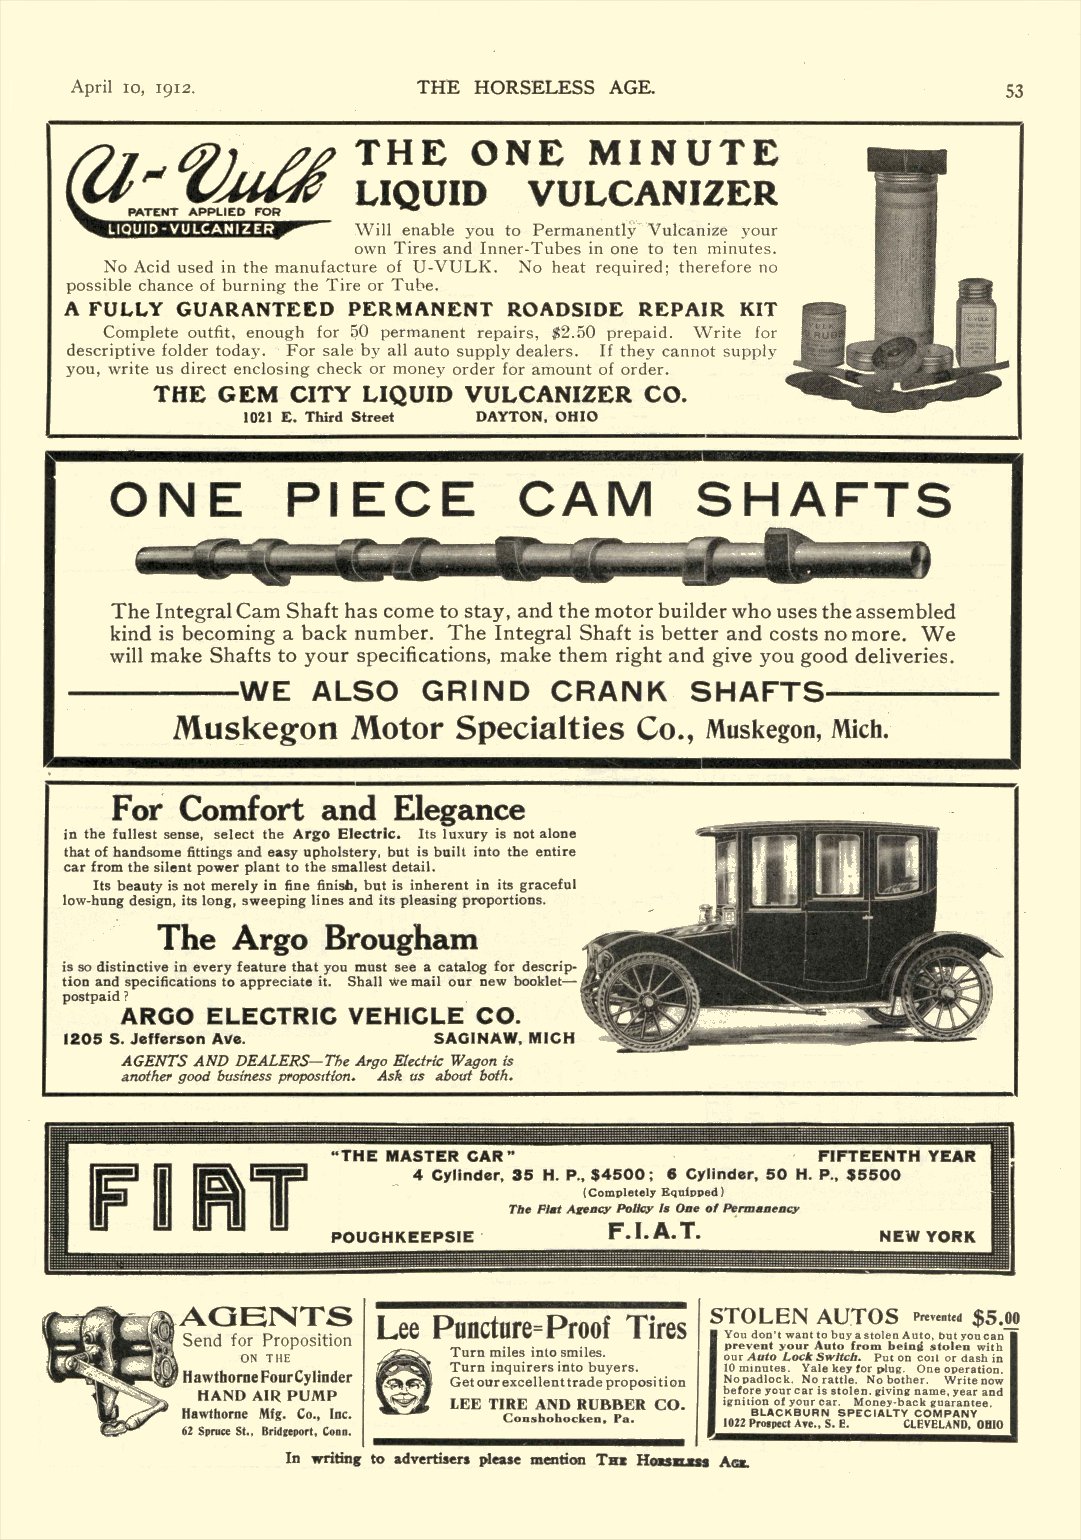 1912 4 10 ARGO Electric The Argo Brougham Argo Electric Vehicles Co Saginaw, MICH THE HORSELESS AGE April 10, 1912 8.25″x12″ page 53